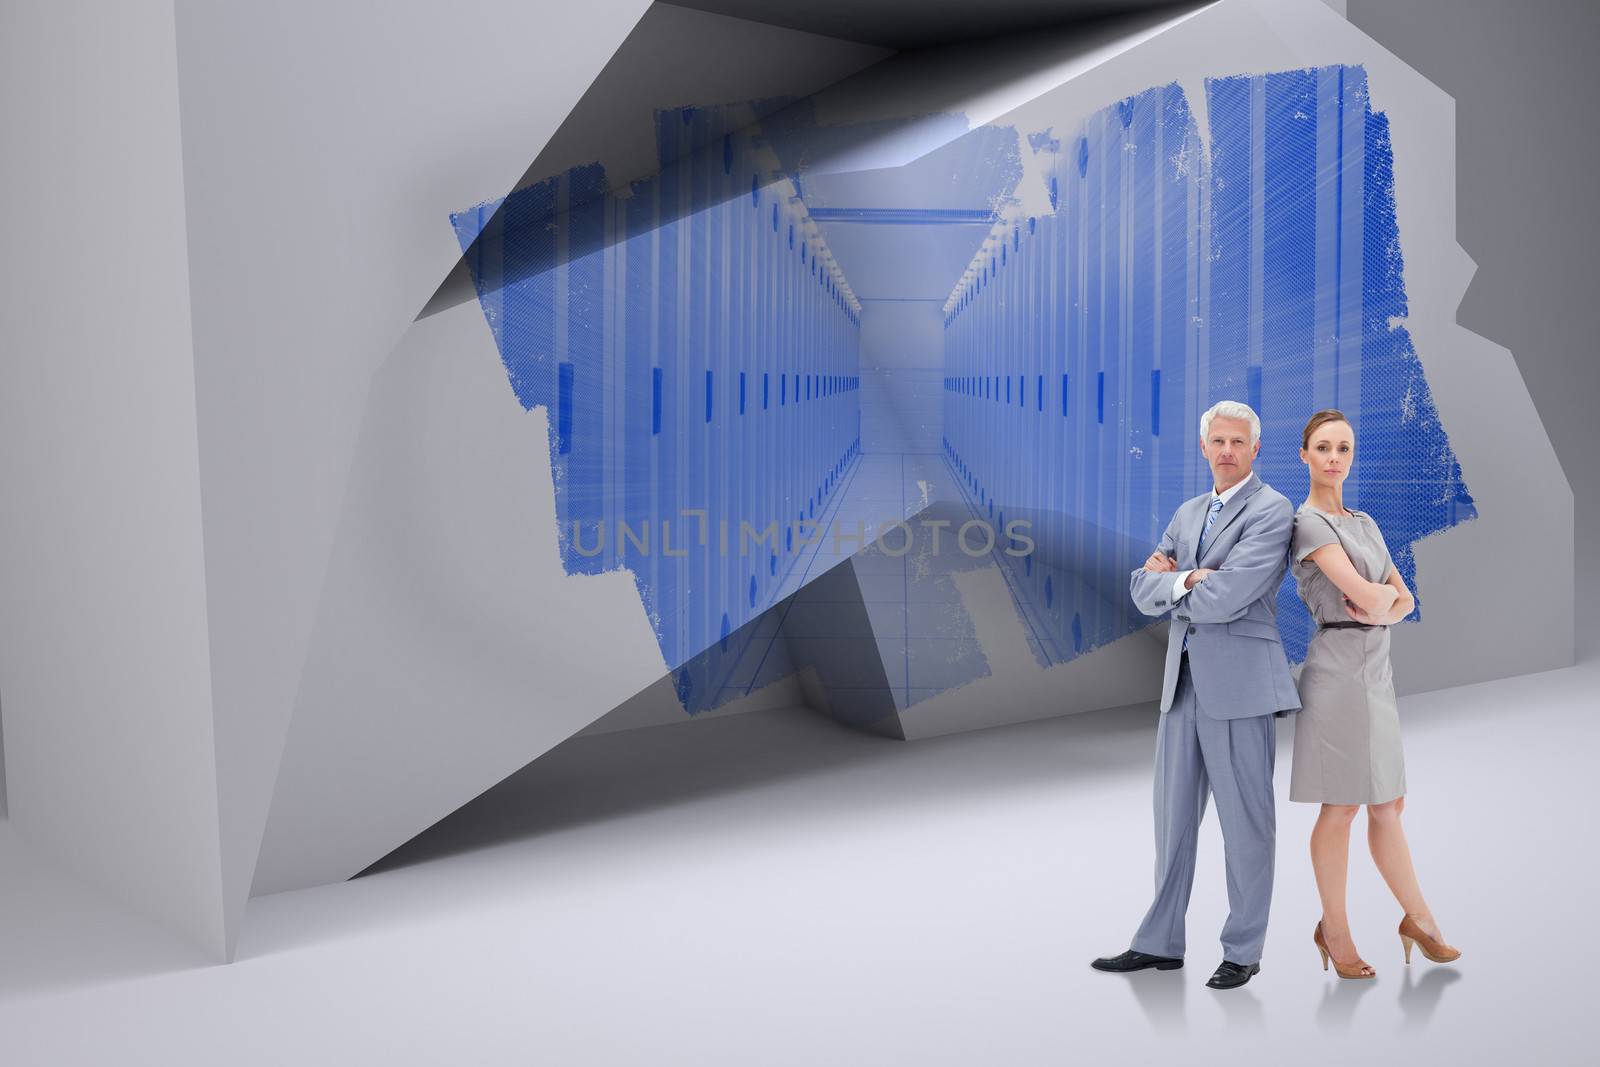 Serious businessman standing back to back with a woman  against abstract screen in room showing server towers